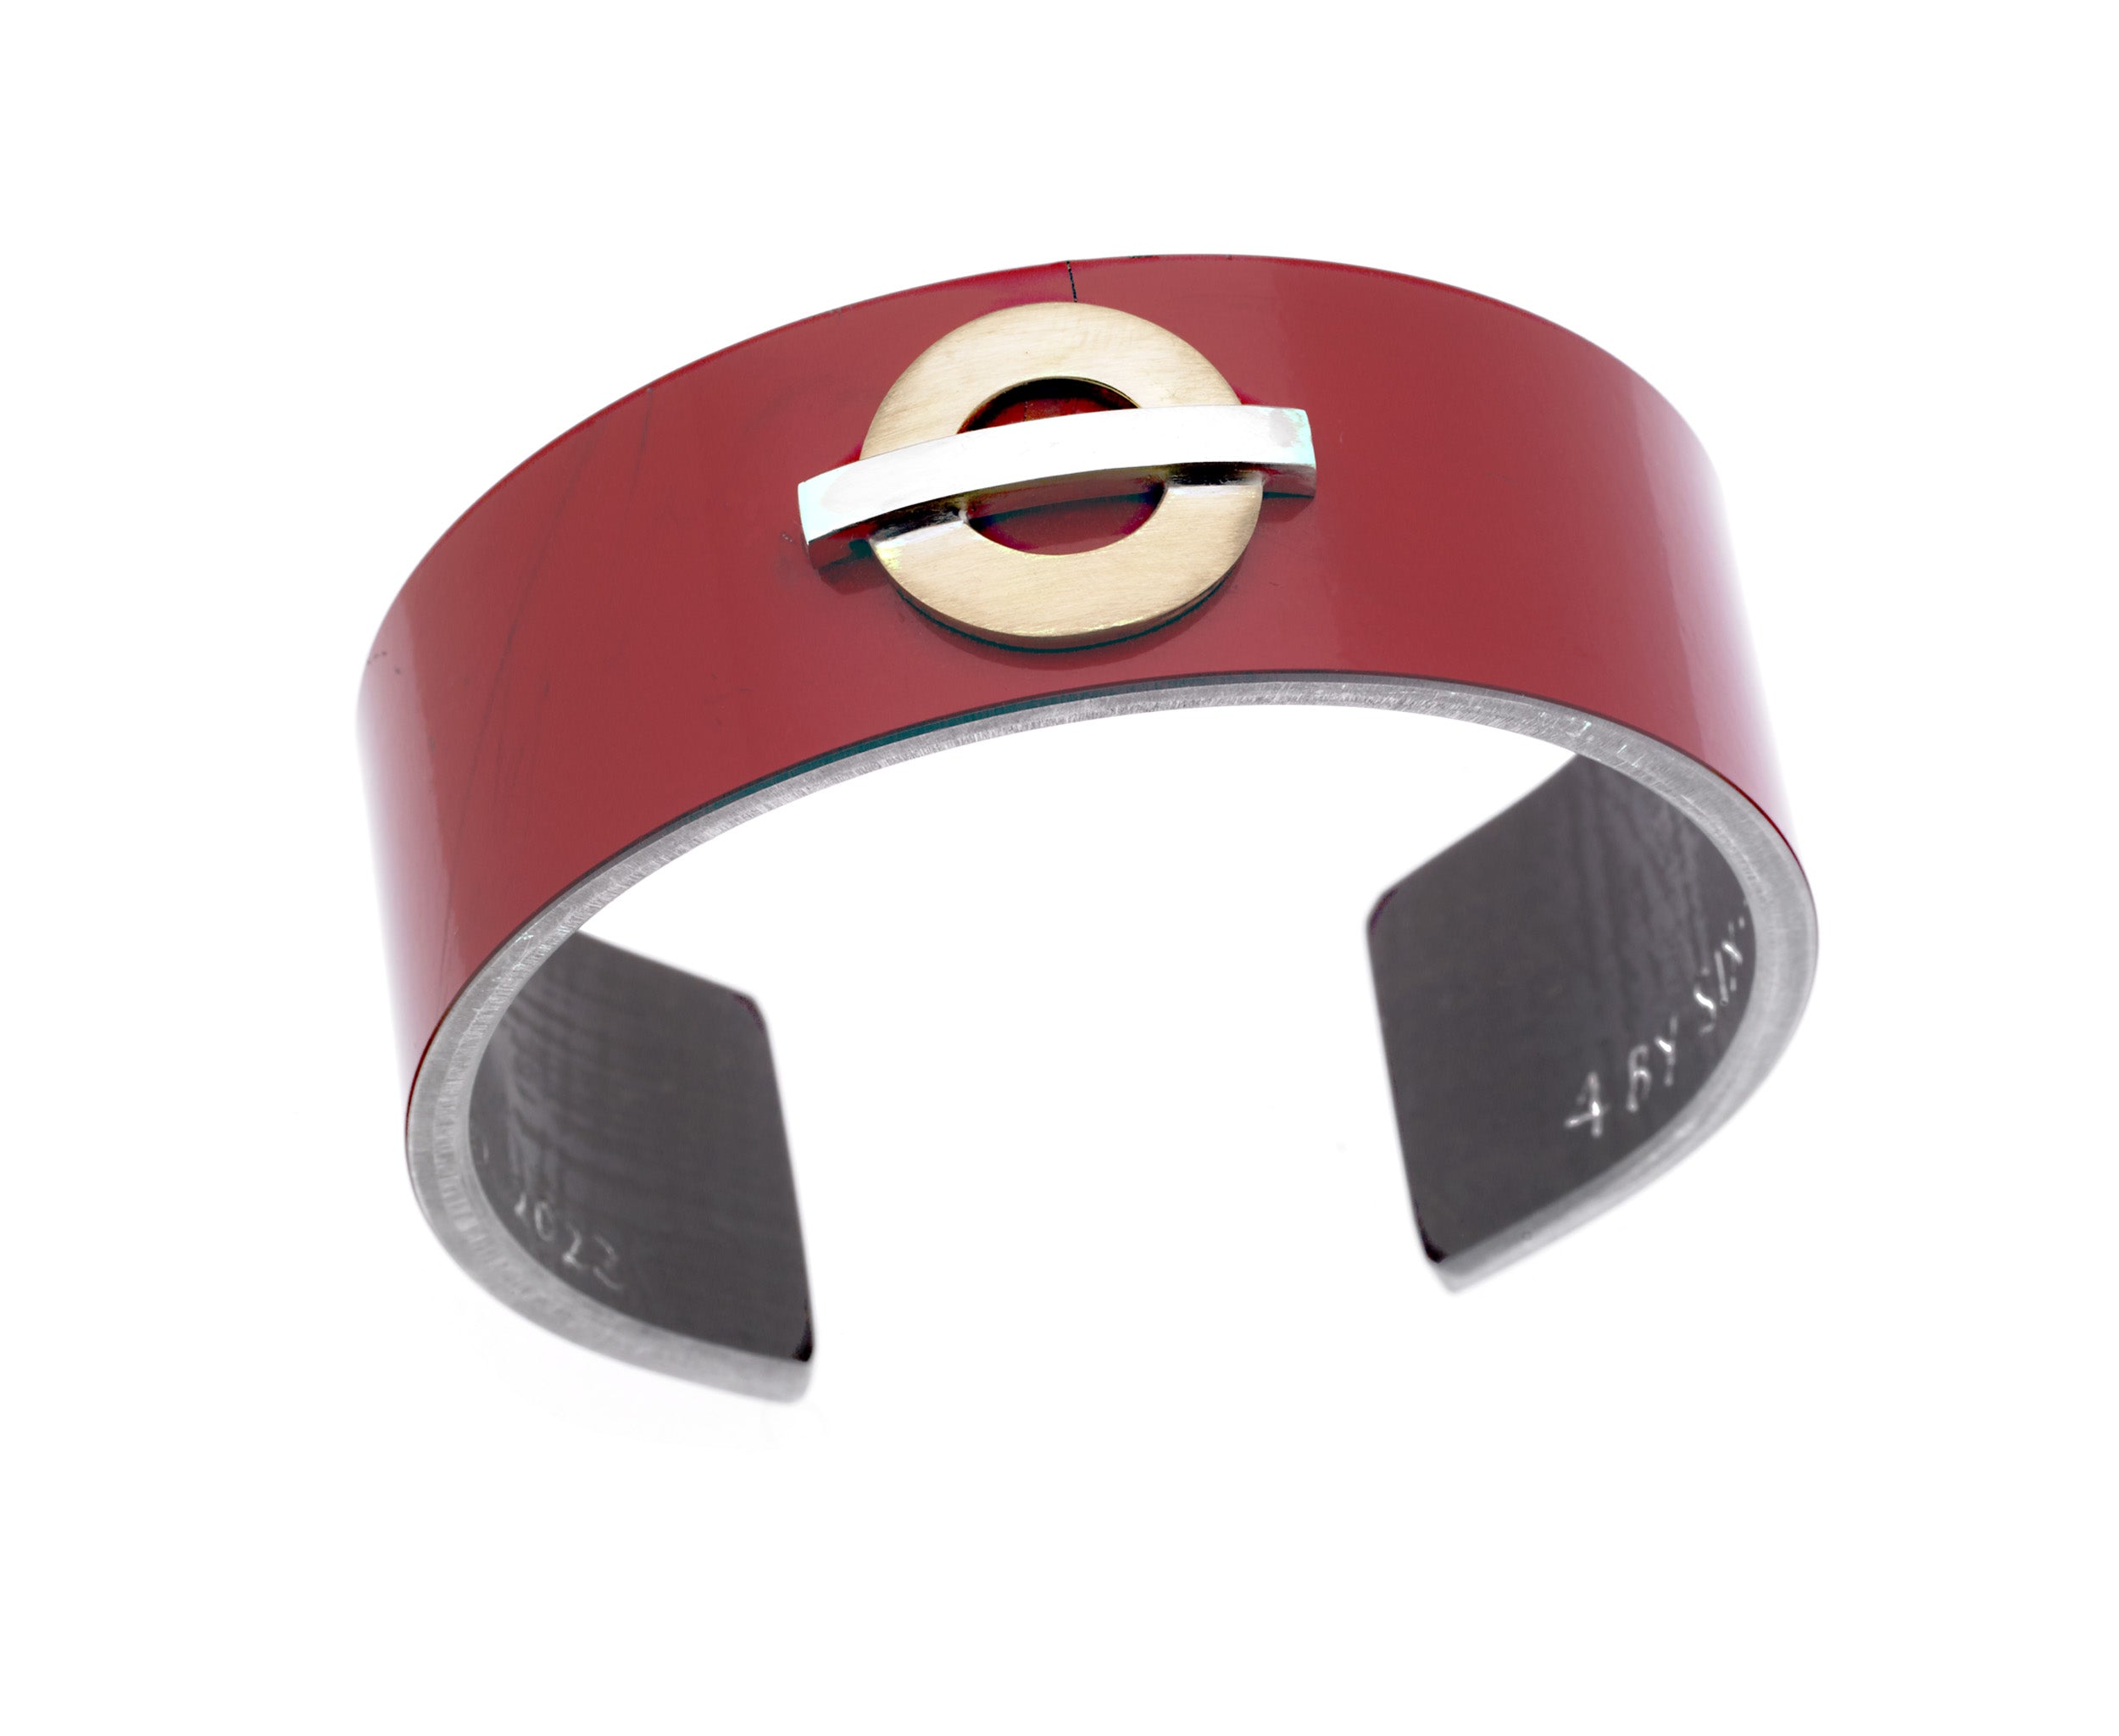 London RED doubledecker bus panel, turned into a bracelet with a tube symbol on it